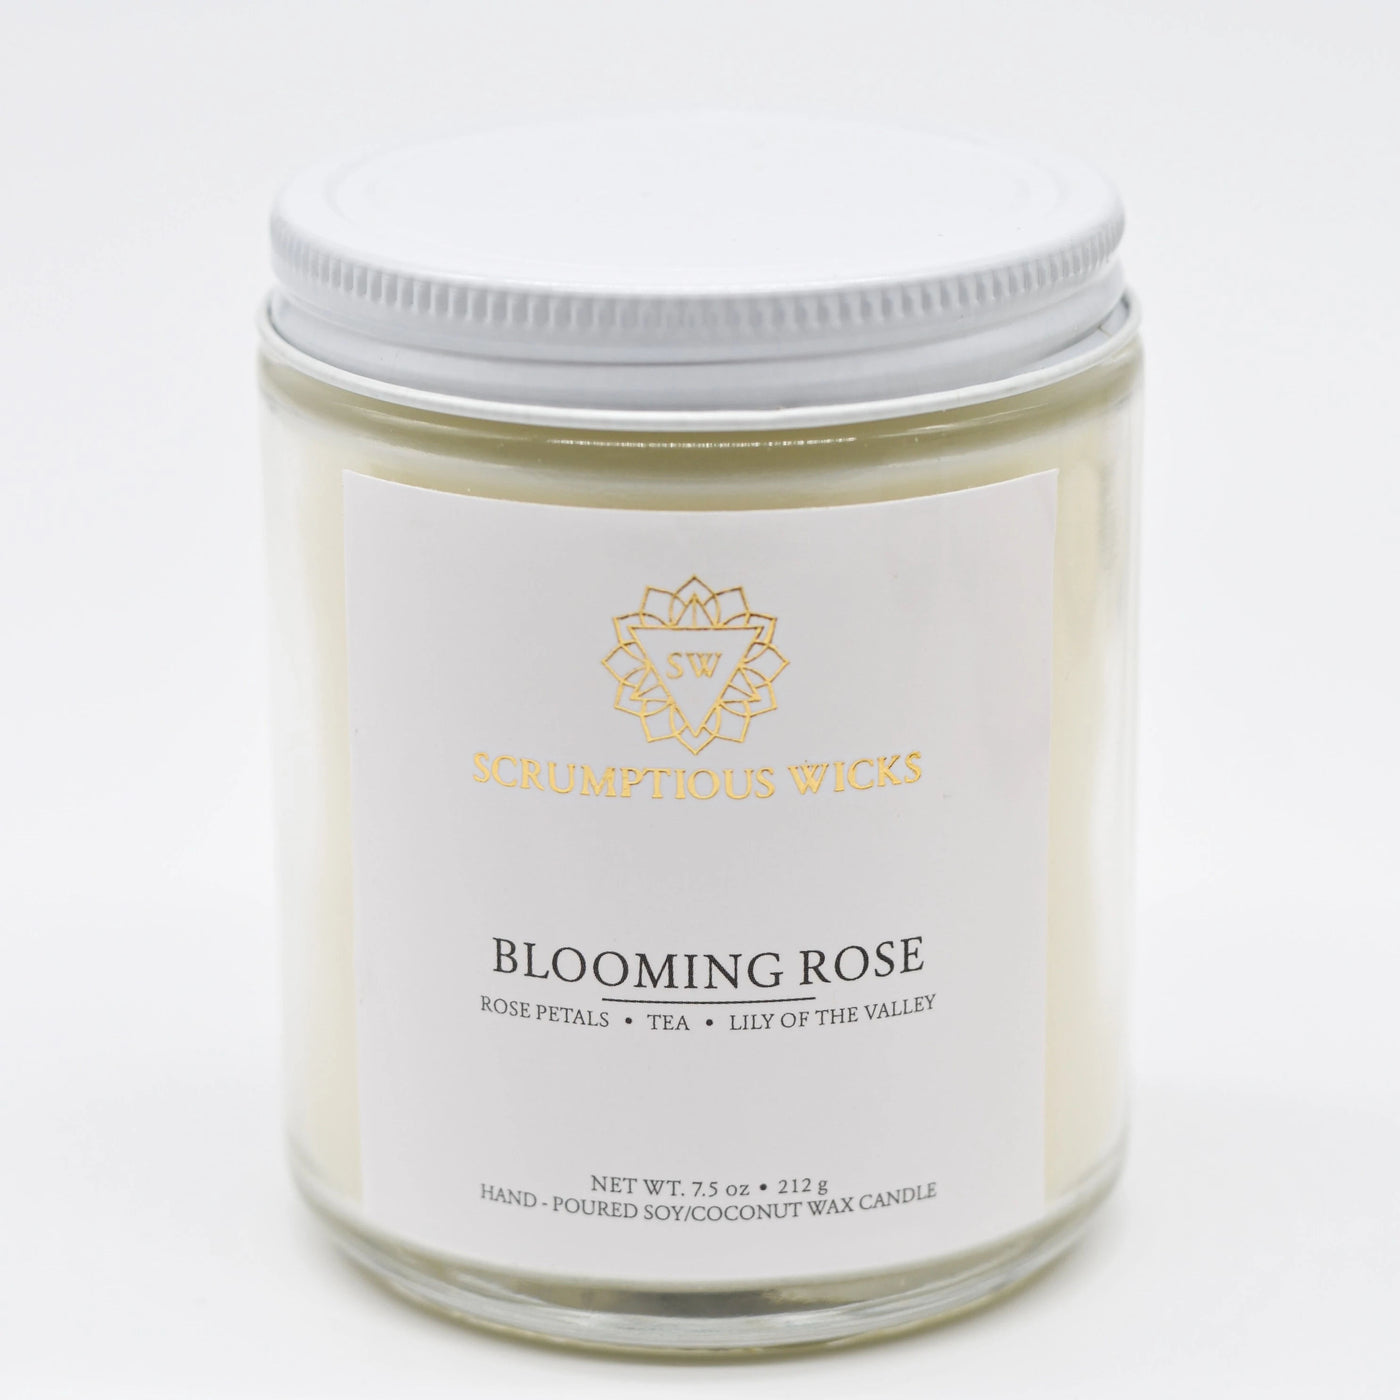 Blooming Rose Jar candle by Scrumptious Wicks